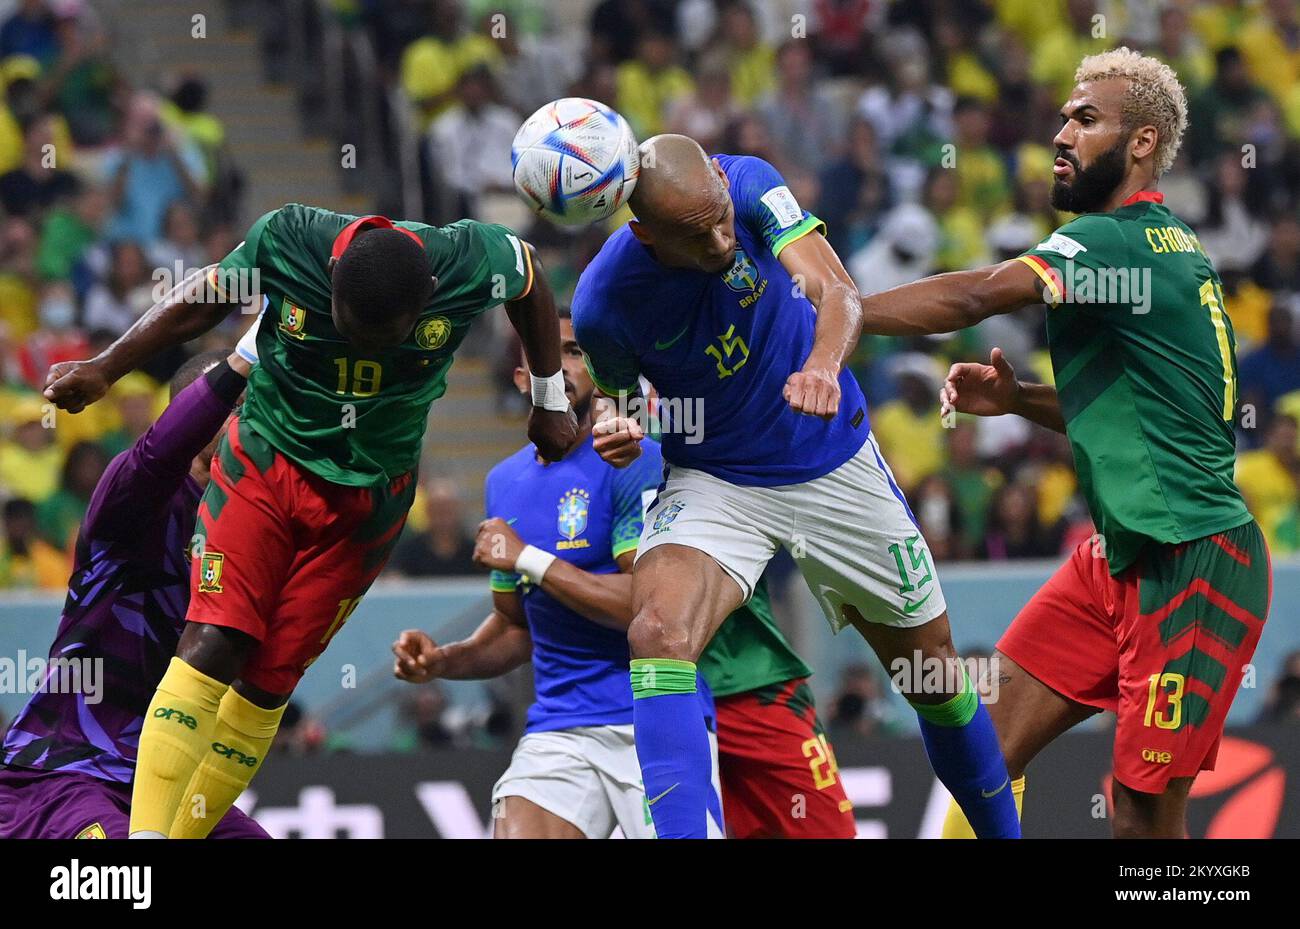 Lusail, Qatar. 2nd Dec, 2022. Fabinho (C) of Brazil vies with Collins Fai (L) of Cameroon during their Group G match at the 2022 FIFA World Cup at Lusail Stadium in Lusail, Qatar, Dec. 2, 2022. Credit: Chen Cheng/Xinhua/Alamy Live News Stock Photo